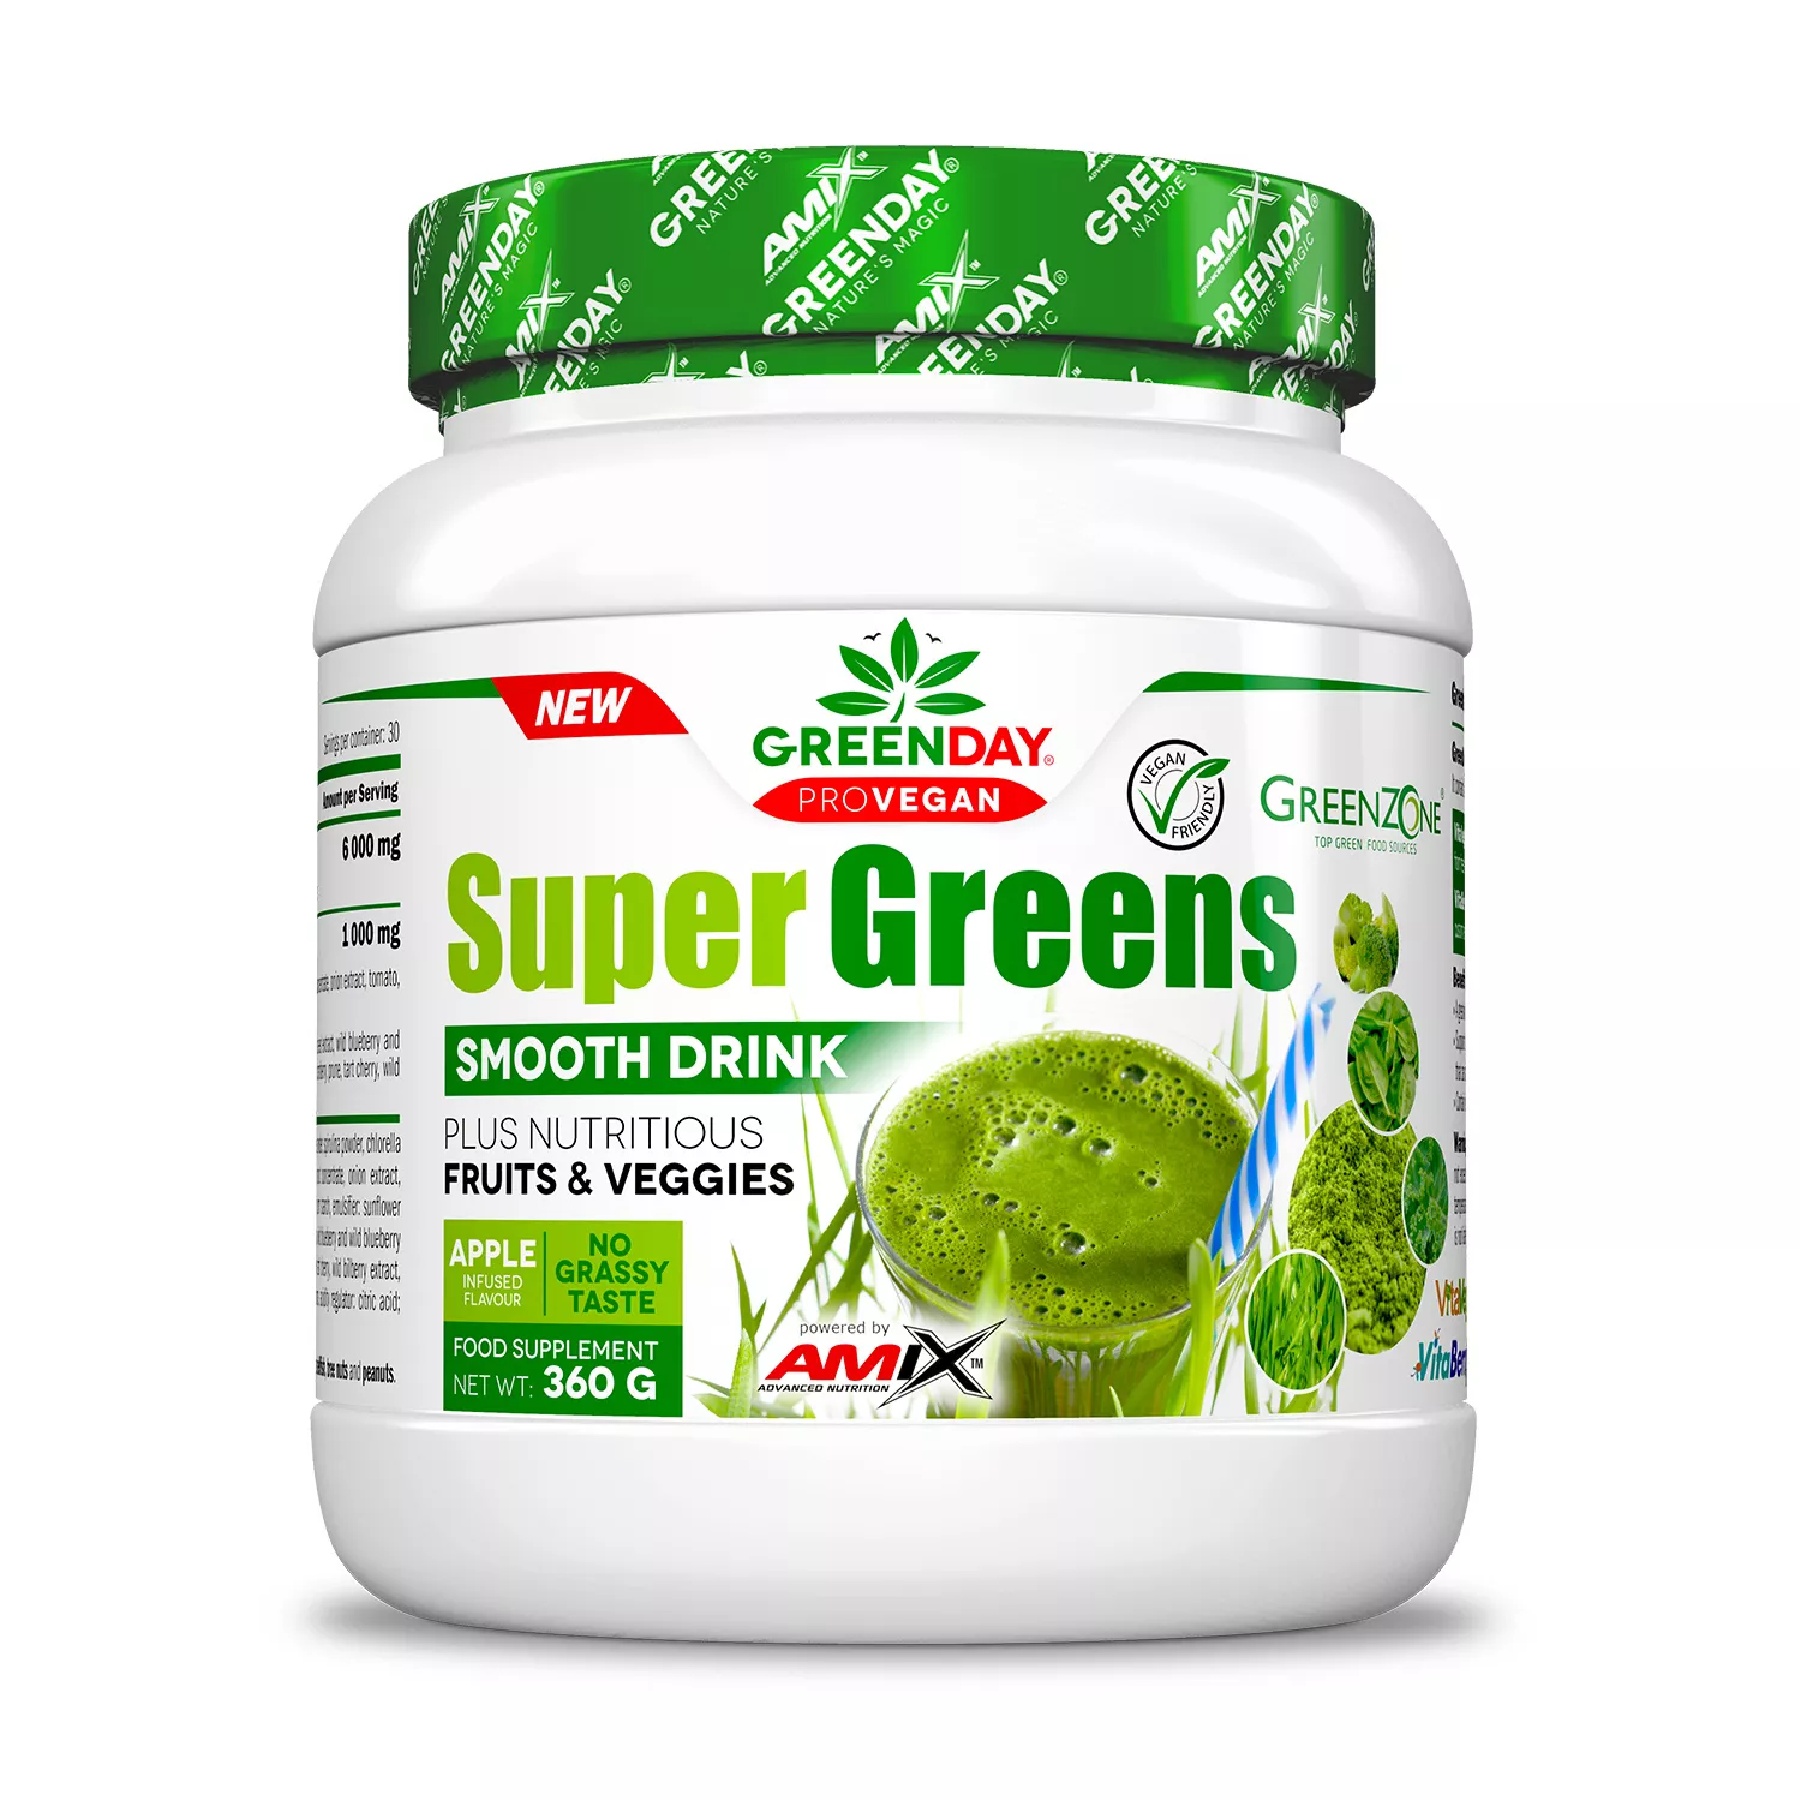 SuperGreens smooth drink - Amix nutrition